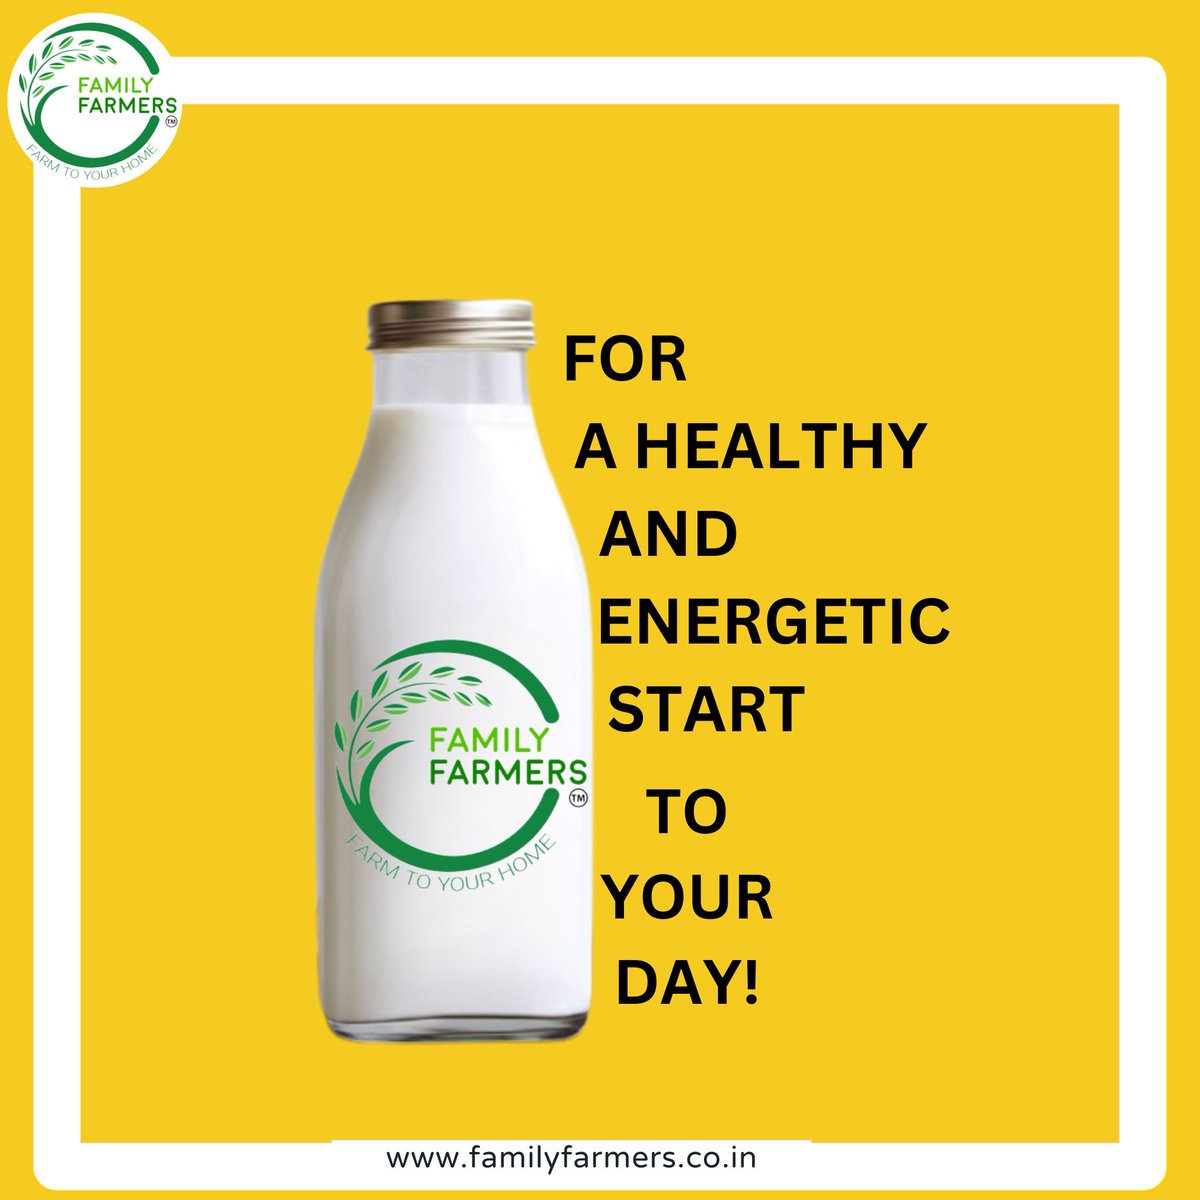 Wake up to a delicious morning with family farmers Desi Cow Milk. It's fresh, nutritious, and as pure as nature intended. 
. 
. #familyfarmers #milkpost #nutrientmilk #sahiwalcowmilk #sahiwalcow #sahiwalmilk #desicowmilk